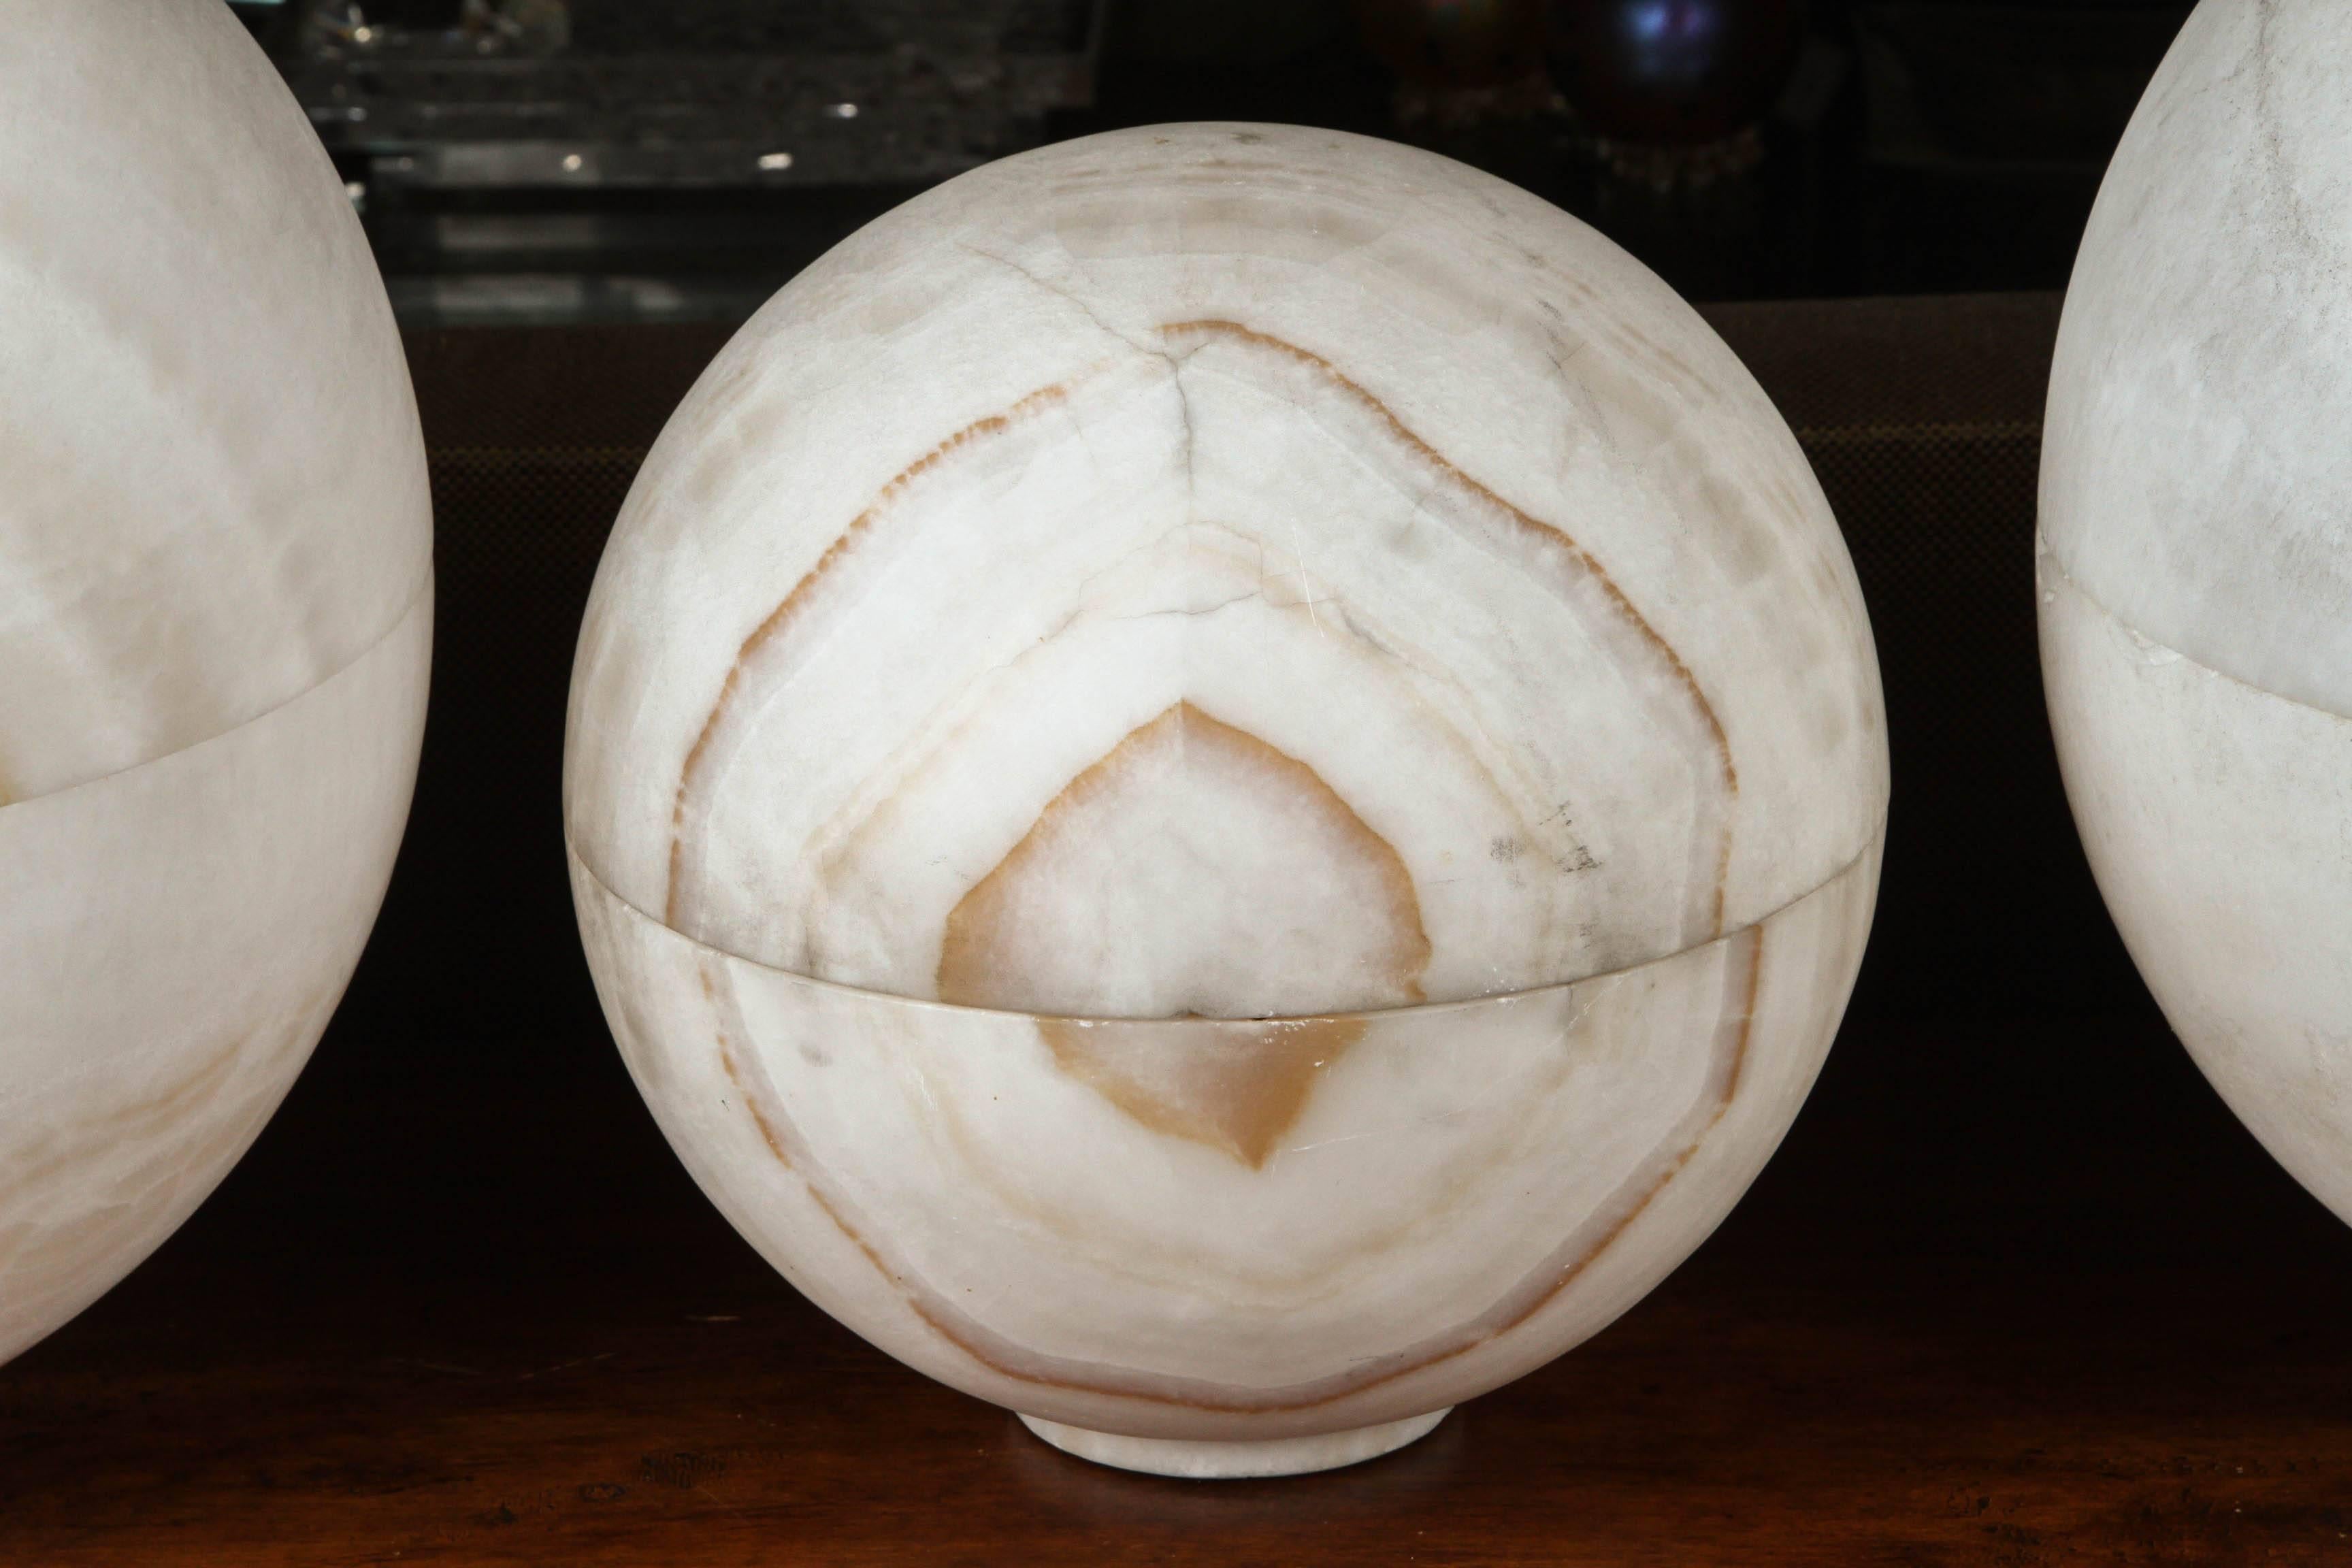 Unique carved onxy sphere lamps. Price listed is for all three, but these can be sold separately. Large spheres are 16